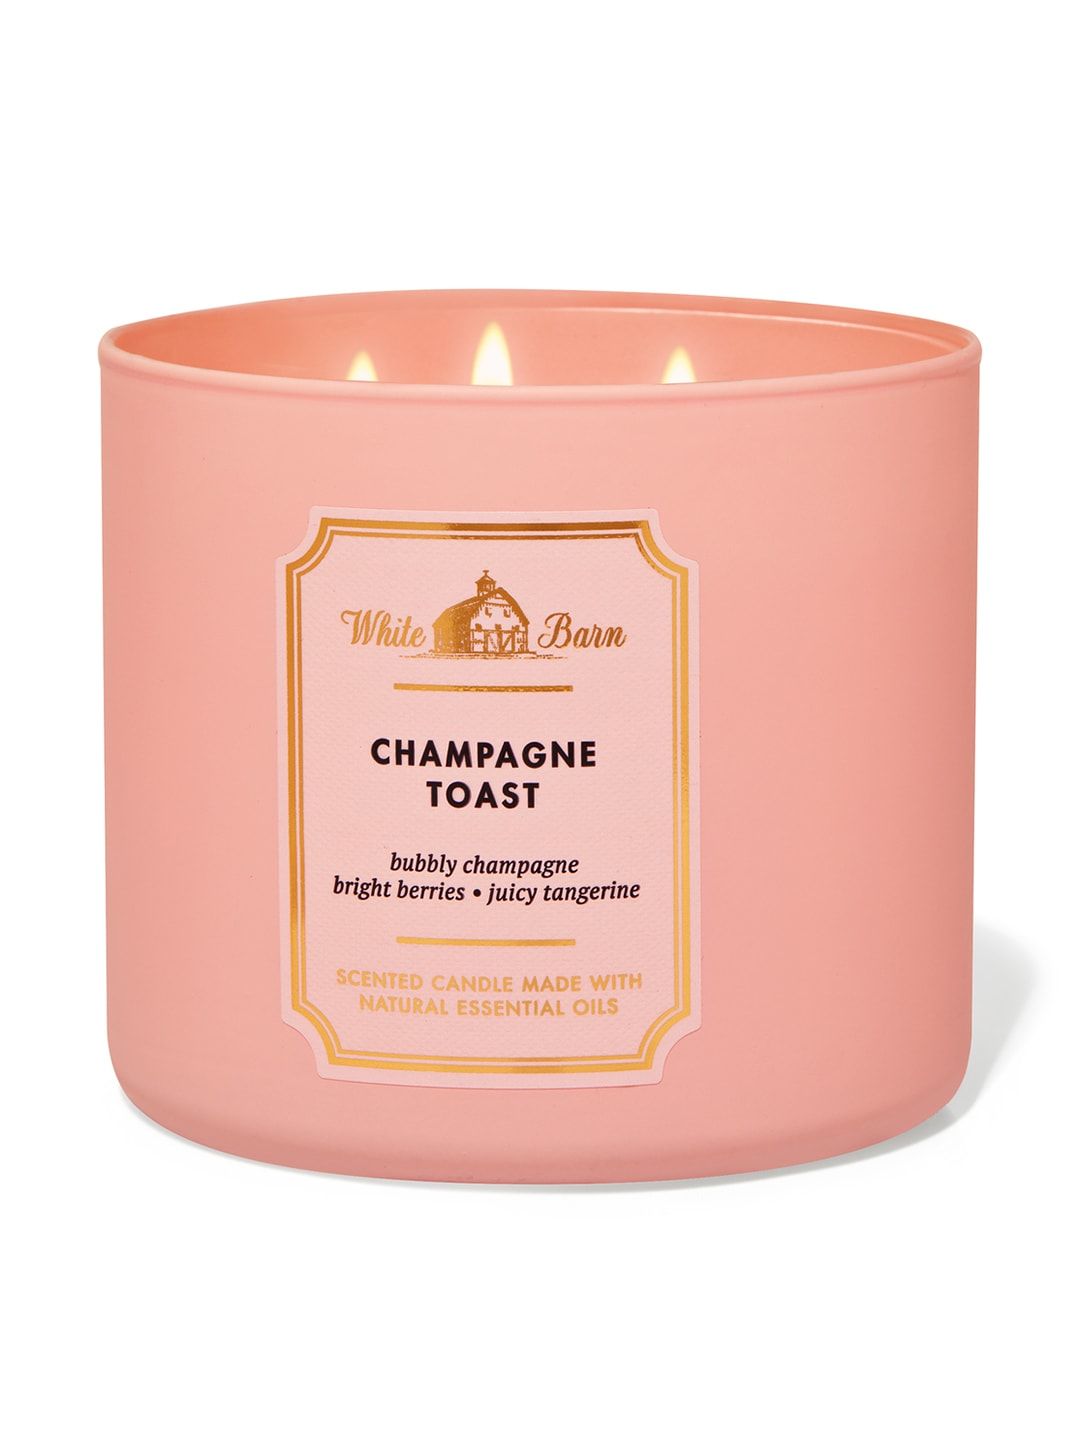 Bath & Body Works Champagne Toast 3-Wick Scented Candle - 411g Price in India